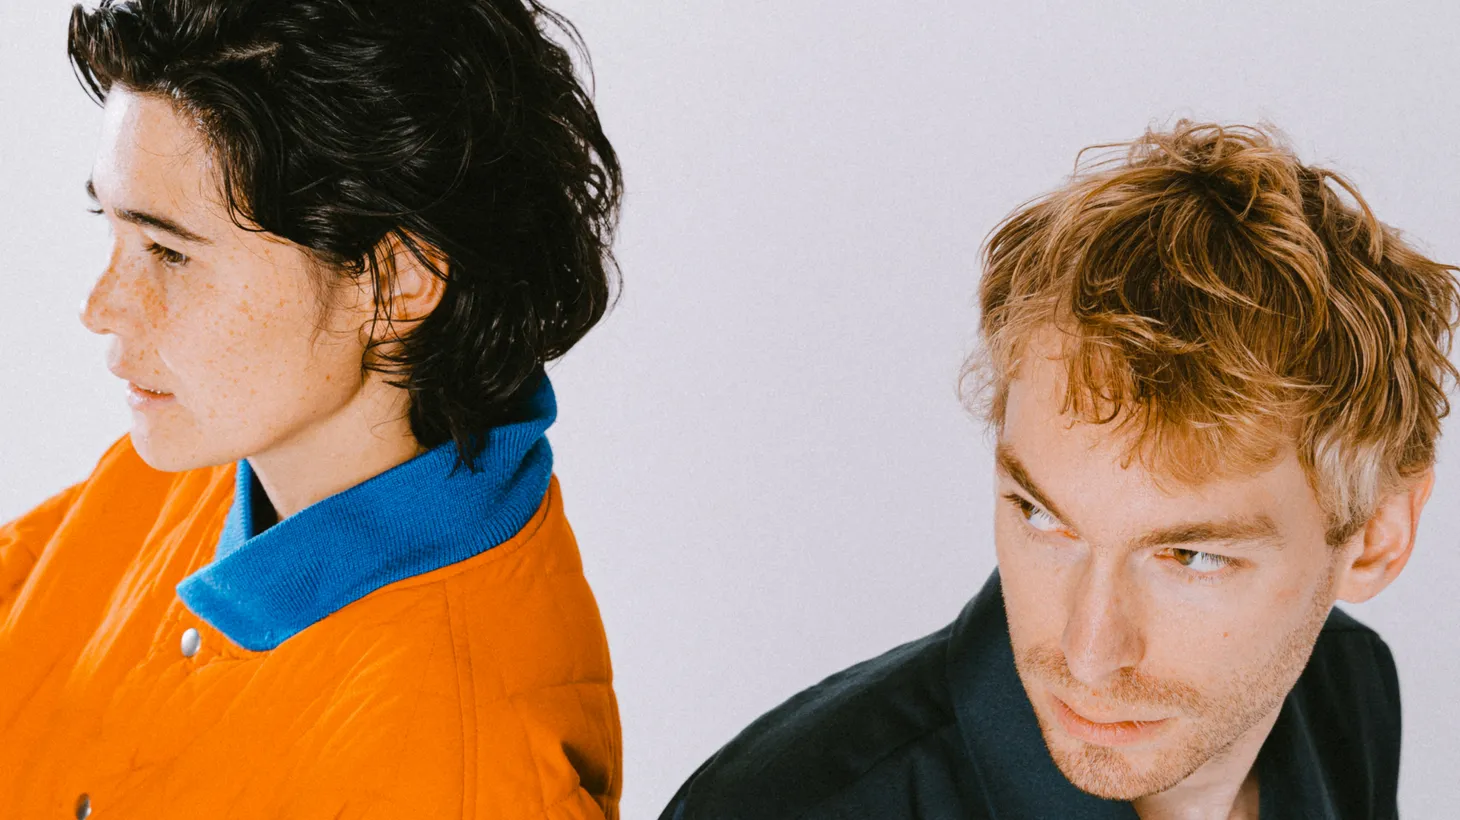 Belgium-Japanese electro-pop duo Aili recently dropped their debut LP Nandakke? to the delight of KCRW DJ Travis Holcombe, who has been sprinkling different tracks on FREAKS ONLY .